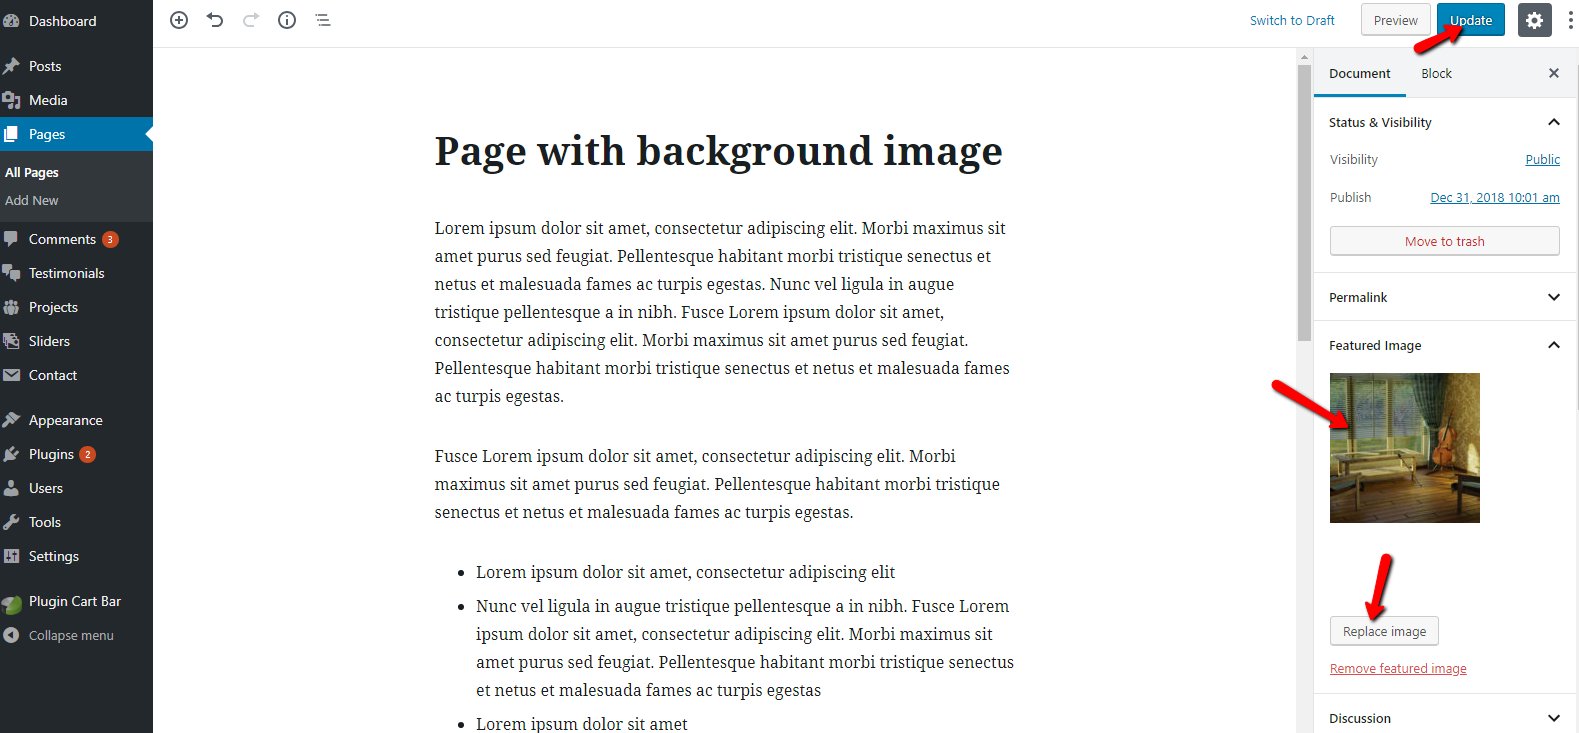 Page with background image